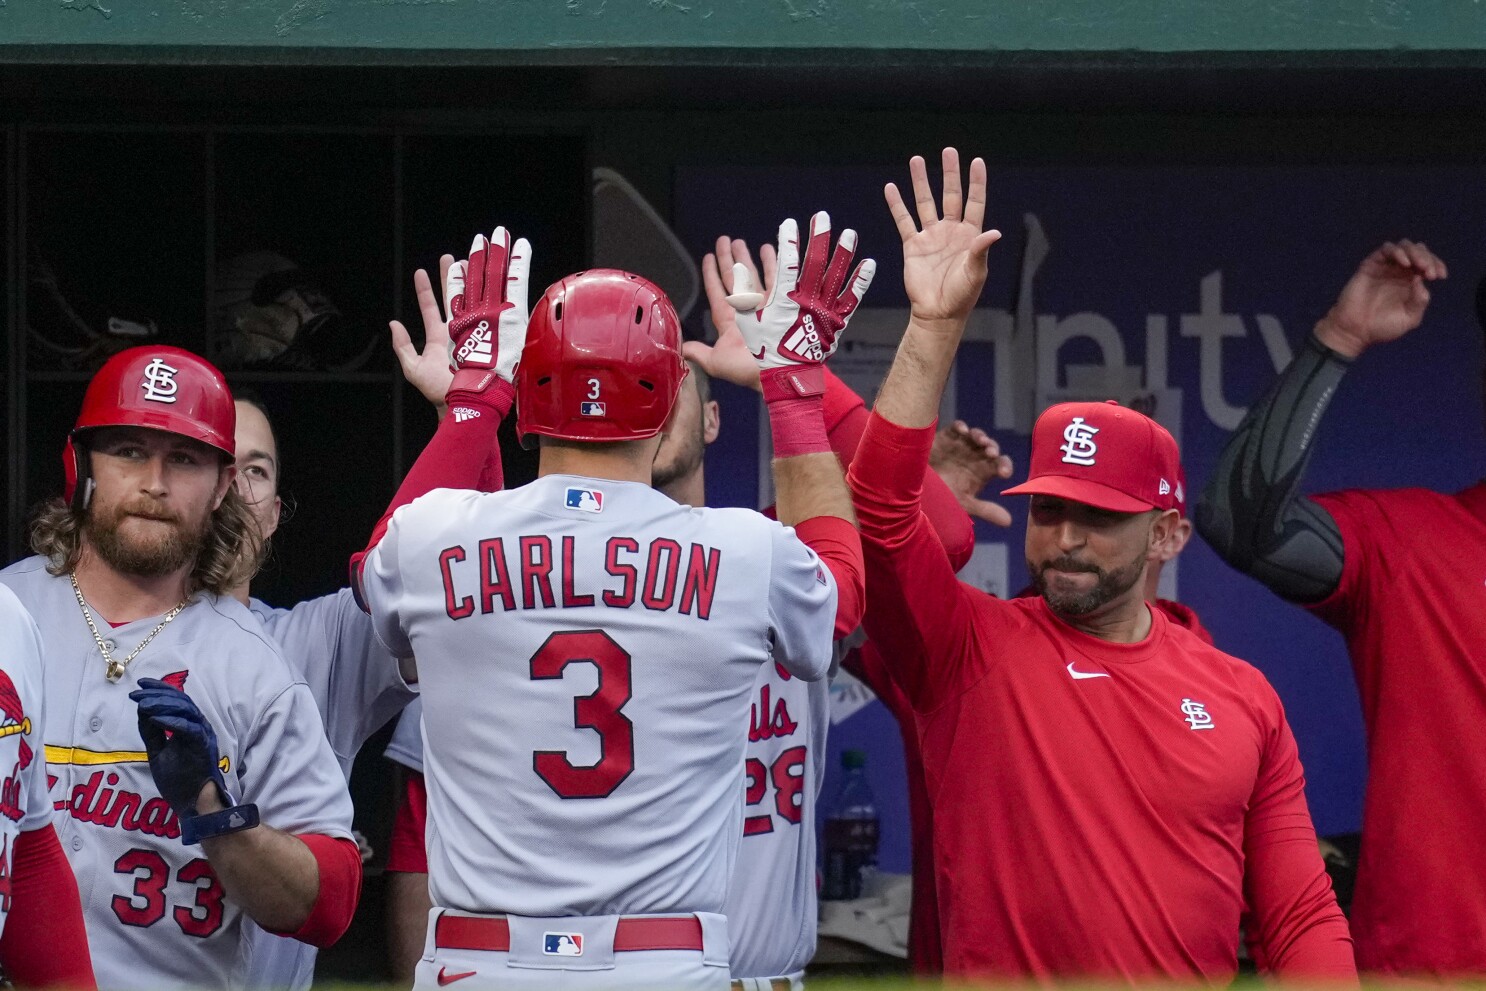 Dylan Carlson hits 2 homers as the Cardinals win their 4th straight,  beating the Nationals 9-3